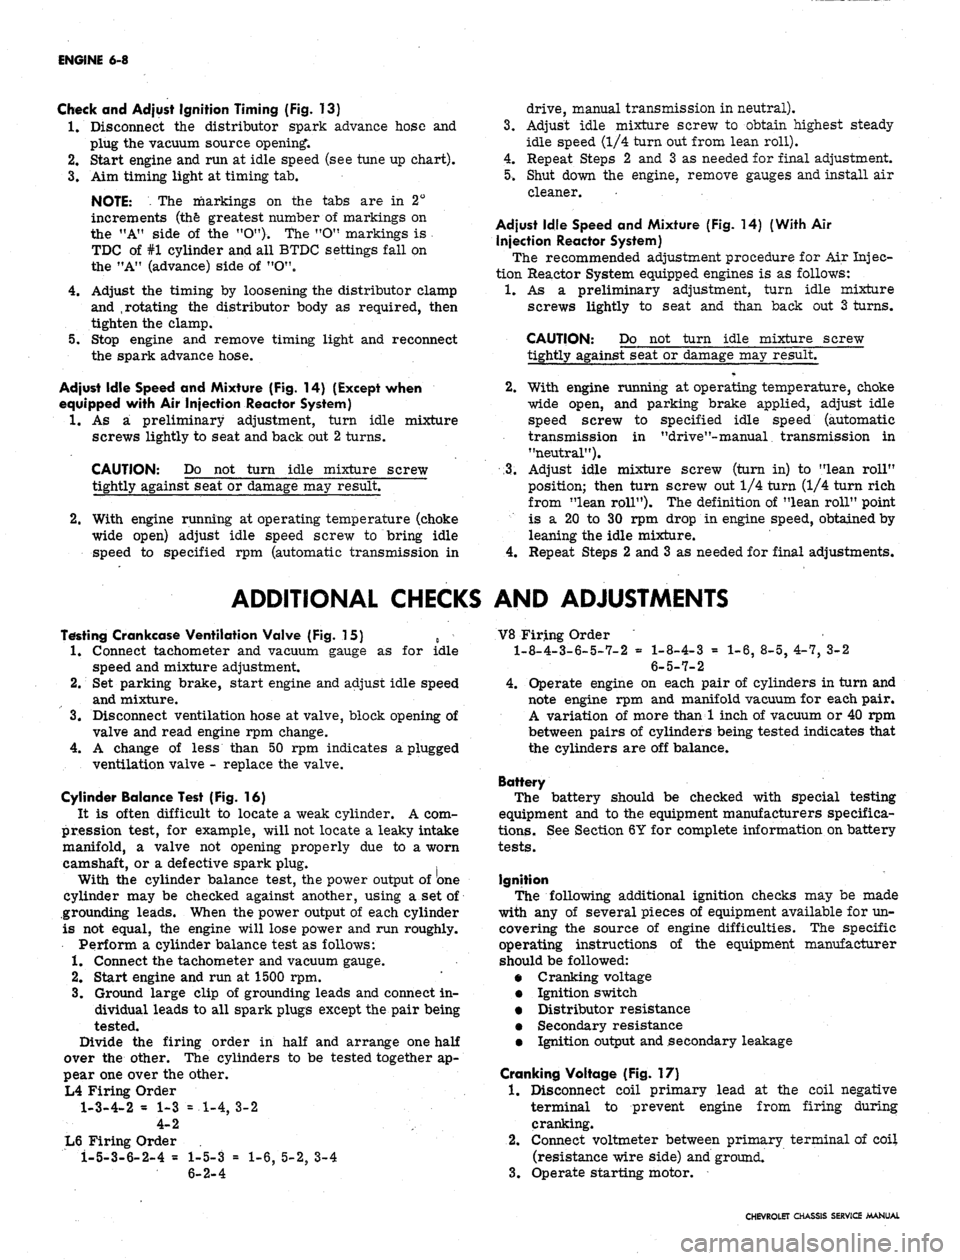 CHEVROLET CAMARO 1967 1.G Chassis Repair Manual 
ENGINE
 6-8

Check
 and
 Adjust Ignition Timing
 (Fig. 13)

1.
 Disconnect
 the
 distributor spark advance hose
 and

plug
 the
 vacuum source opening.

2.
 Start engine
 and run at
 idle speed
 (see